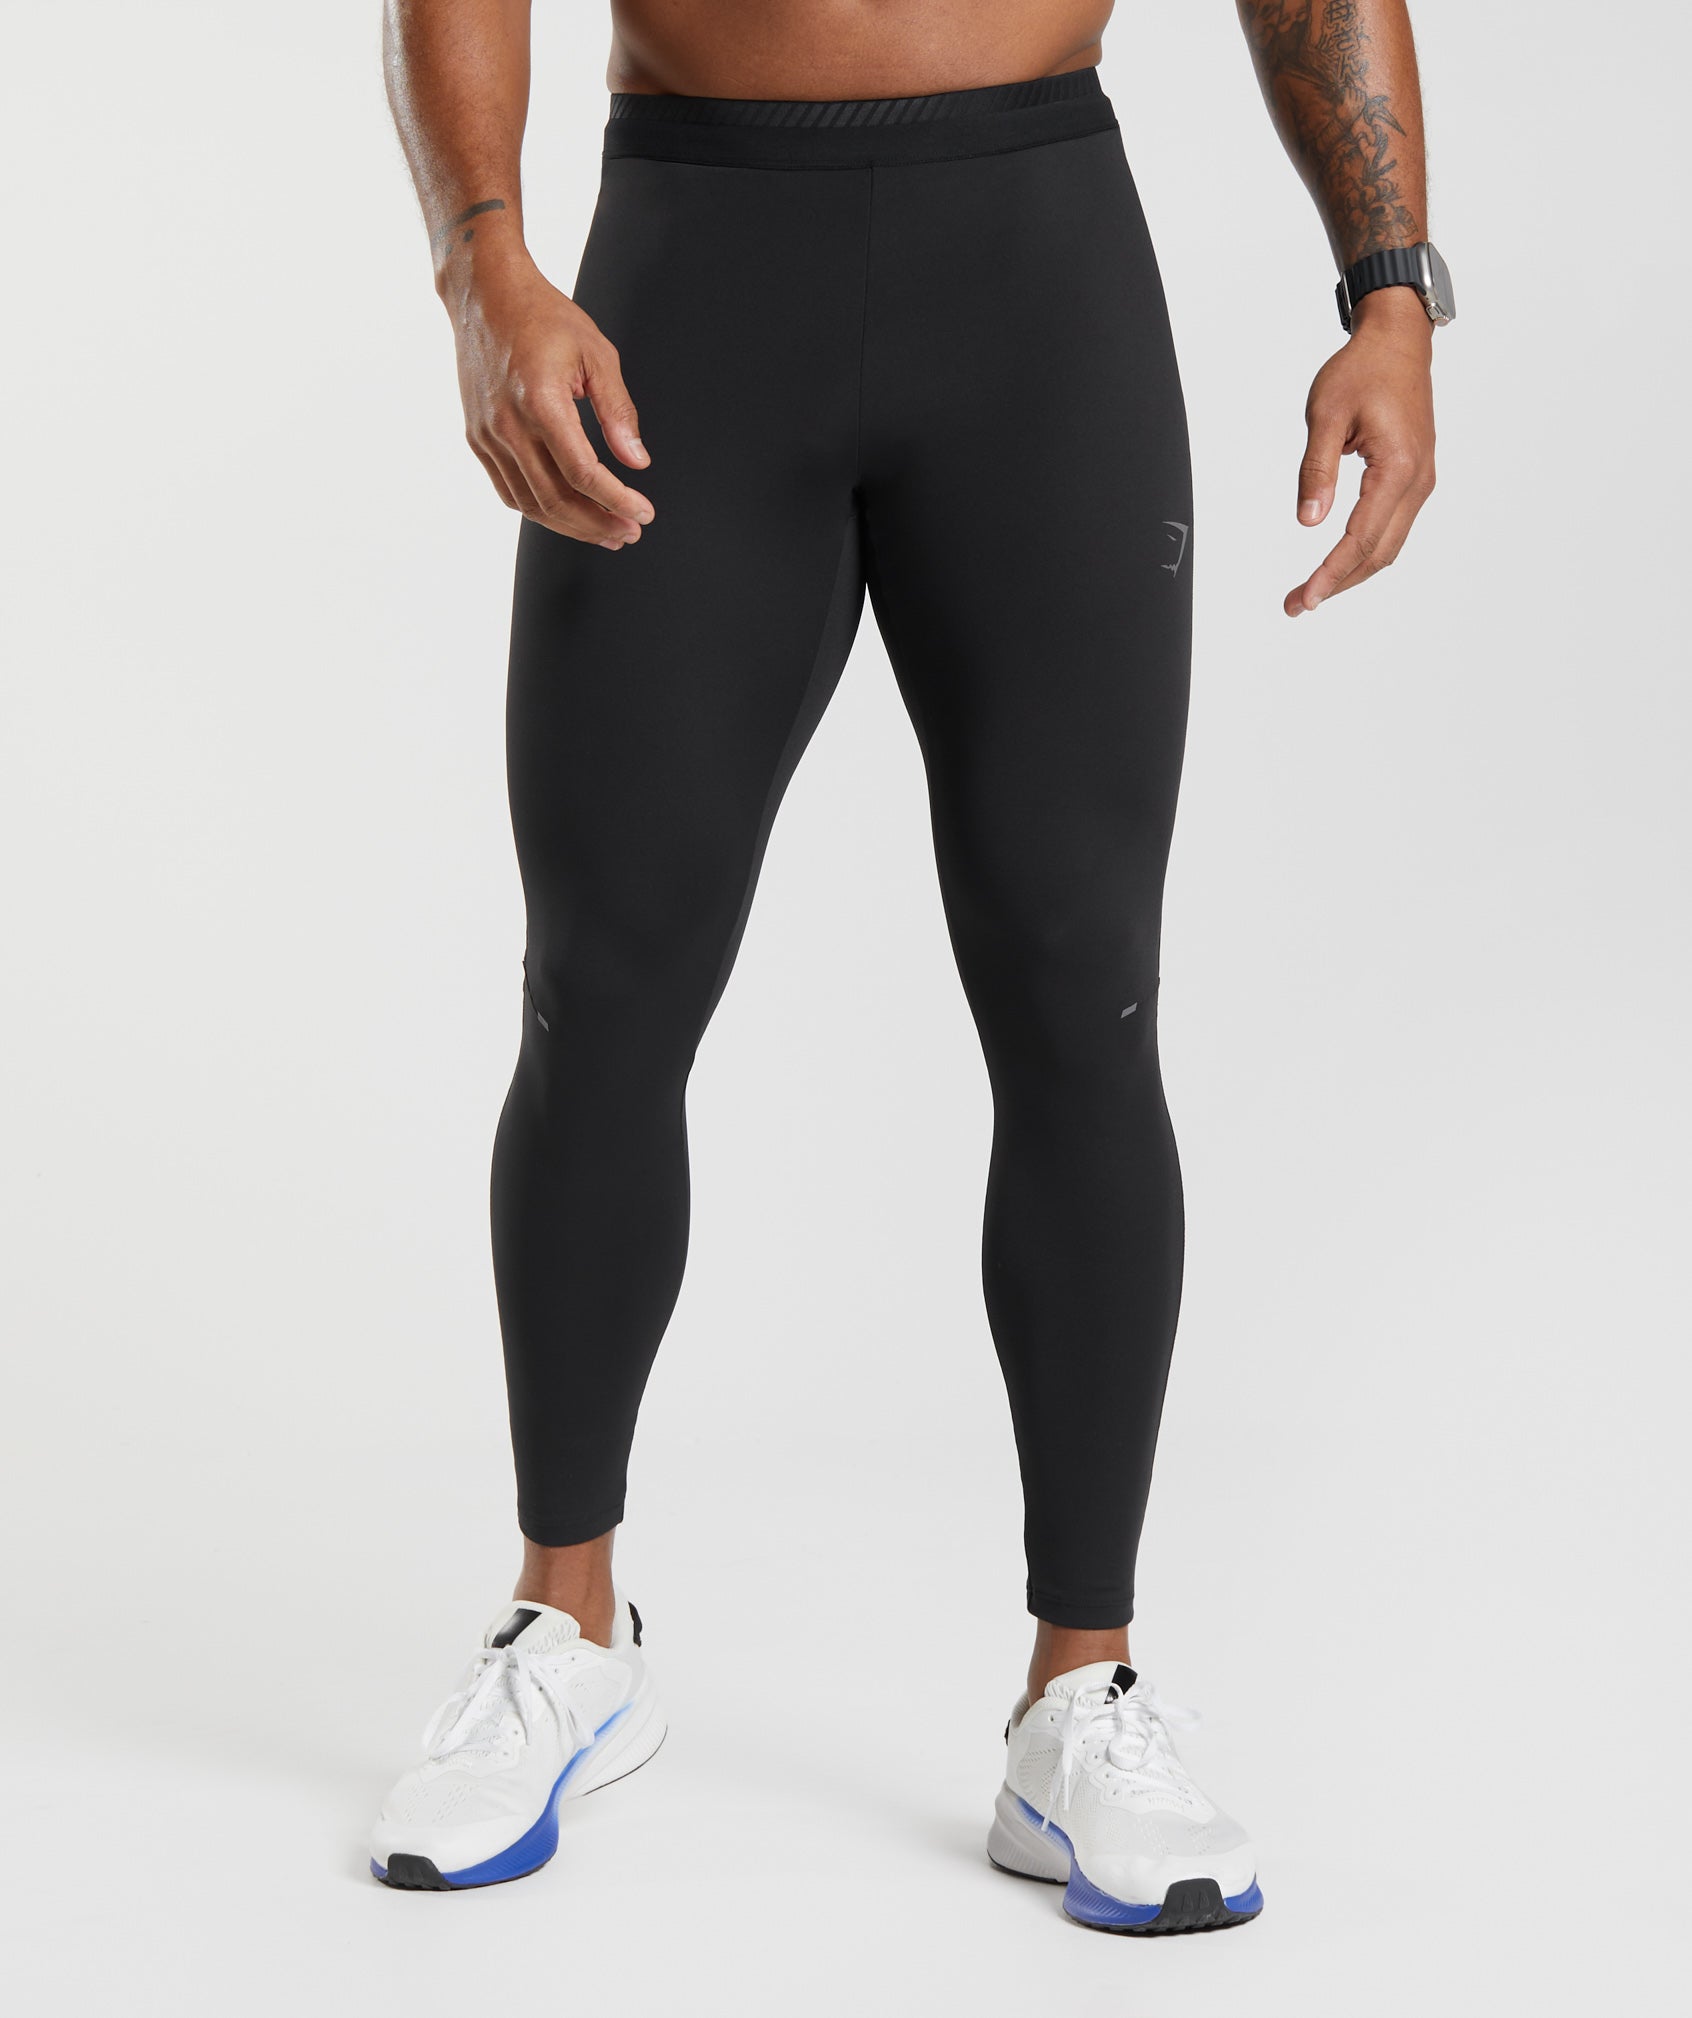 Are there any advantages or disadvantages to wearing tight clothing, such  as spandex pants and leggings, long-term (months)? - Quora